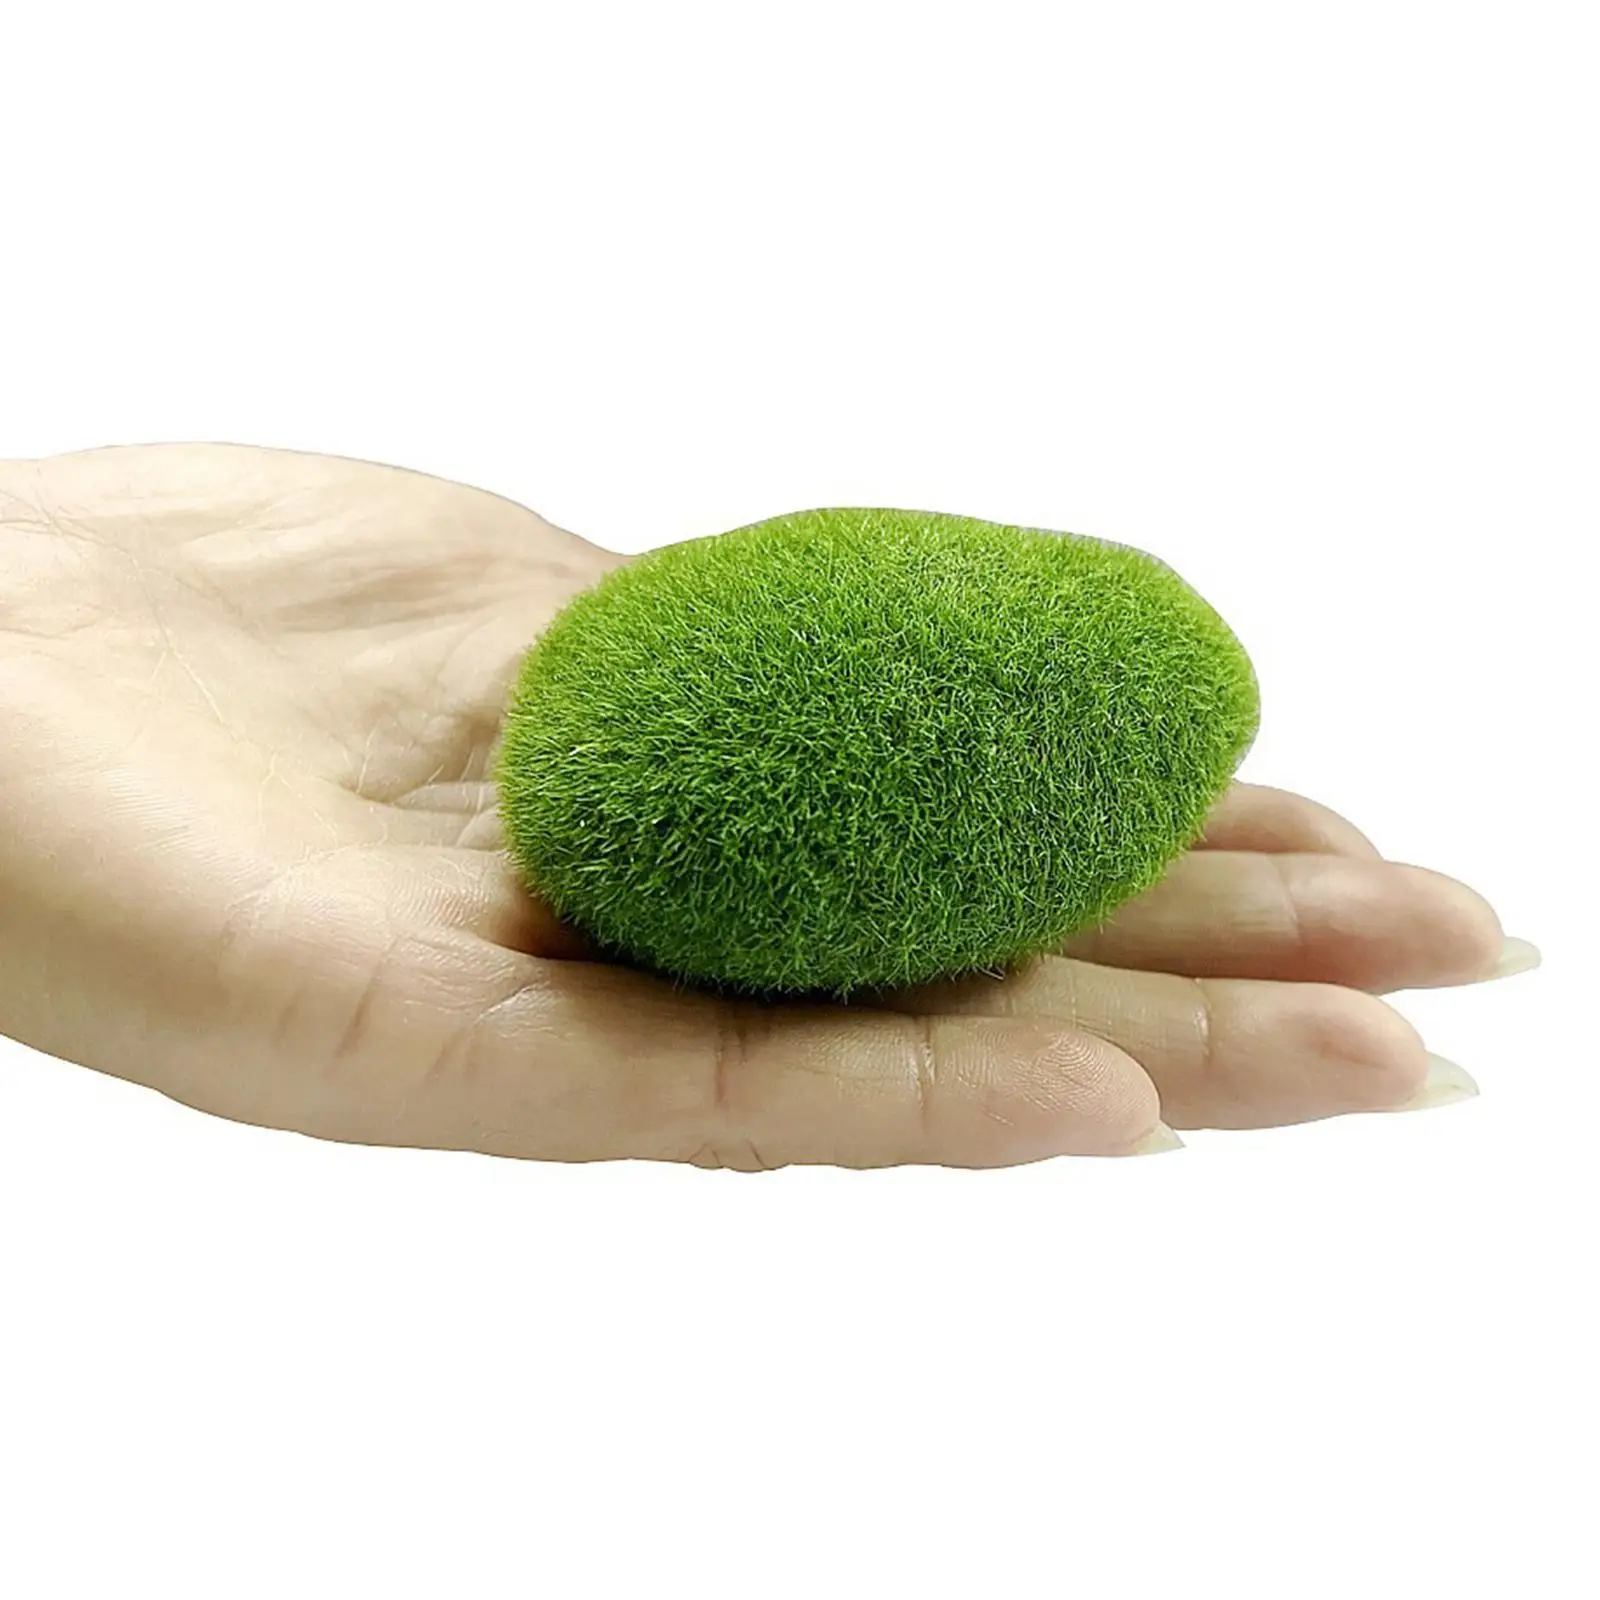 Artificial Moss Rock Green Moss Covered Stone for Hotel Floral Arrangements